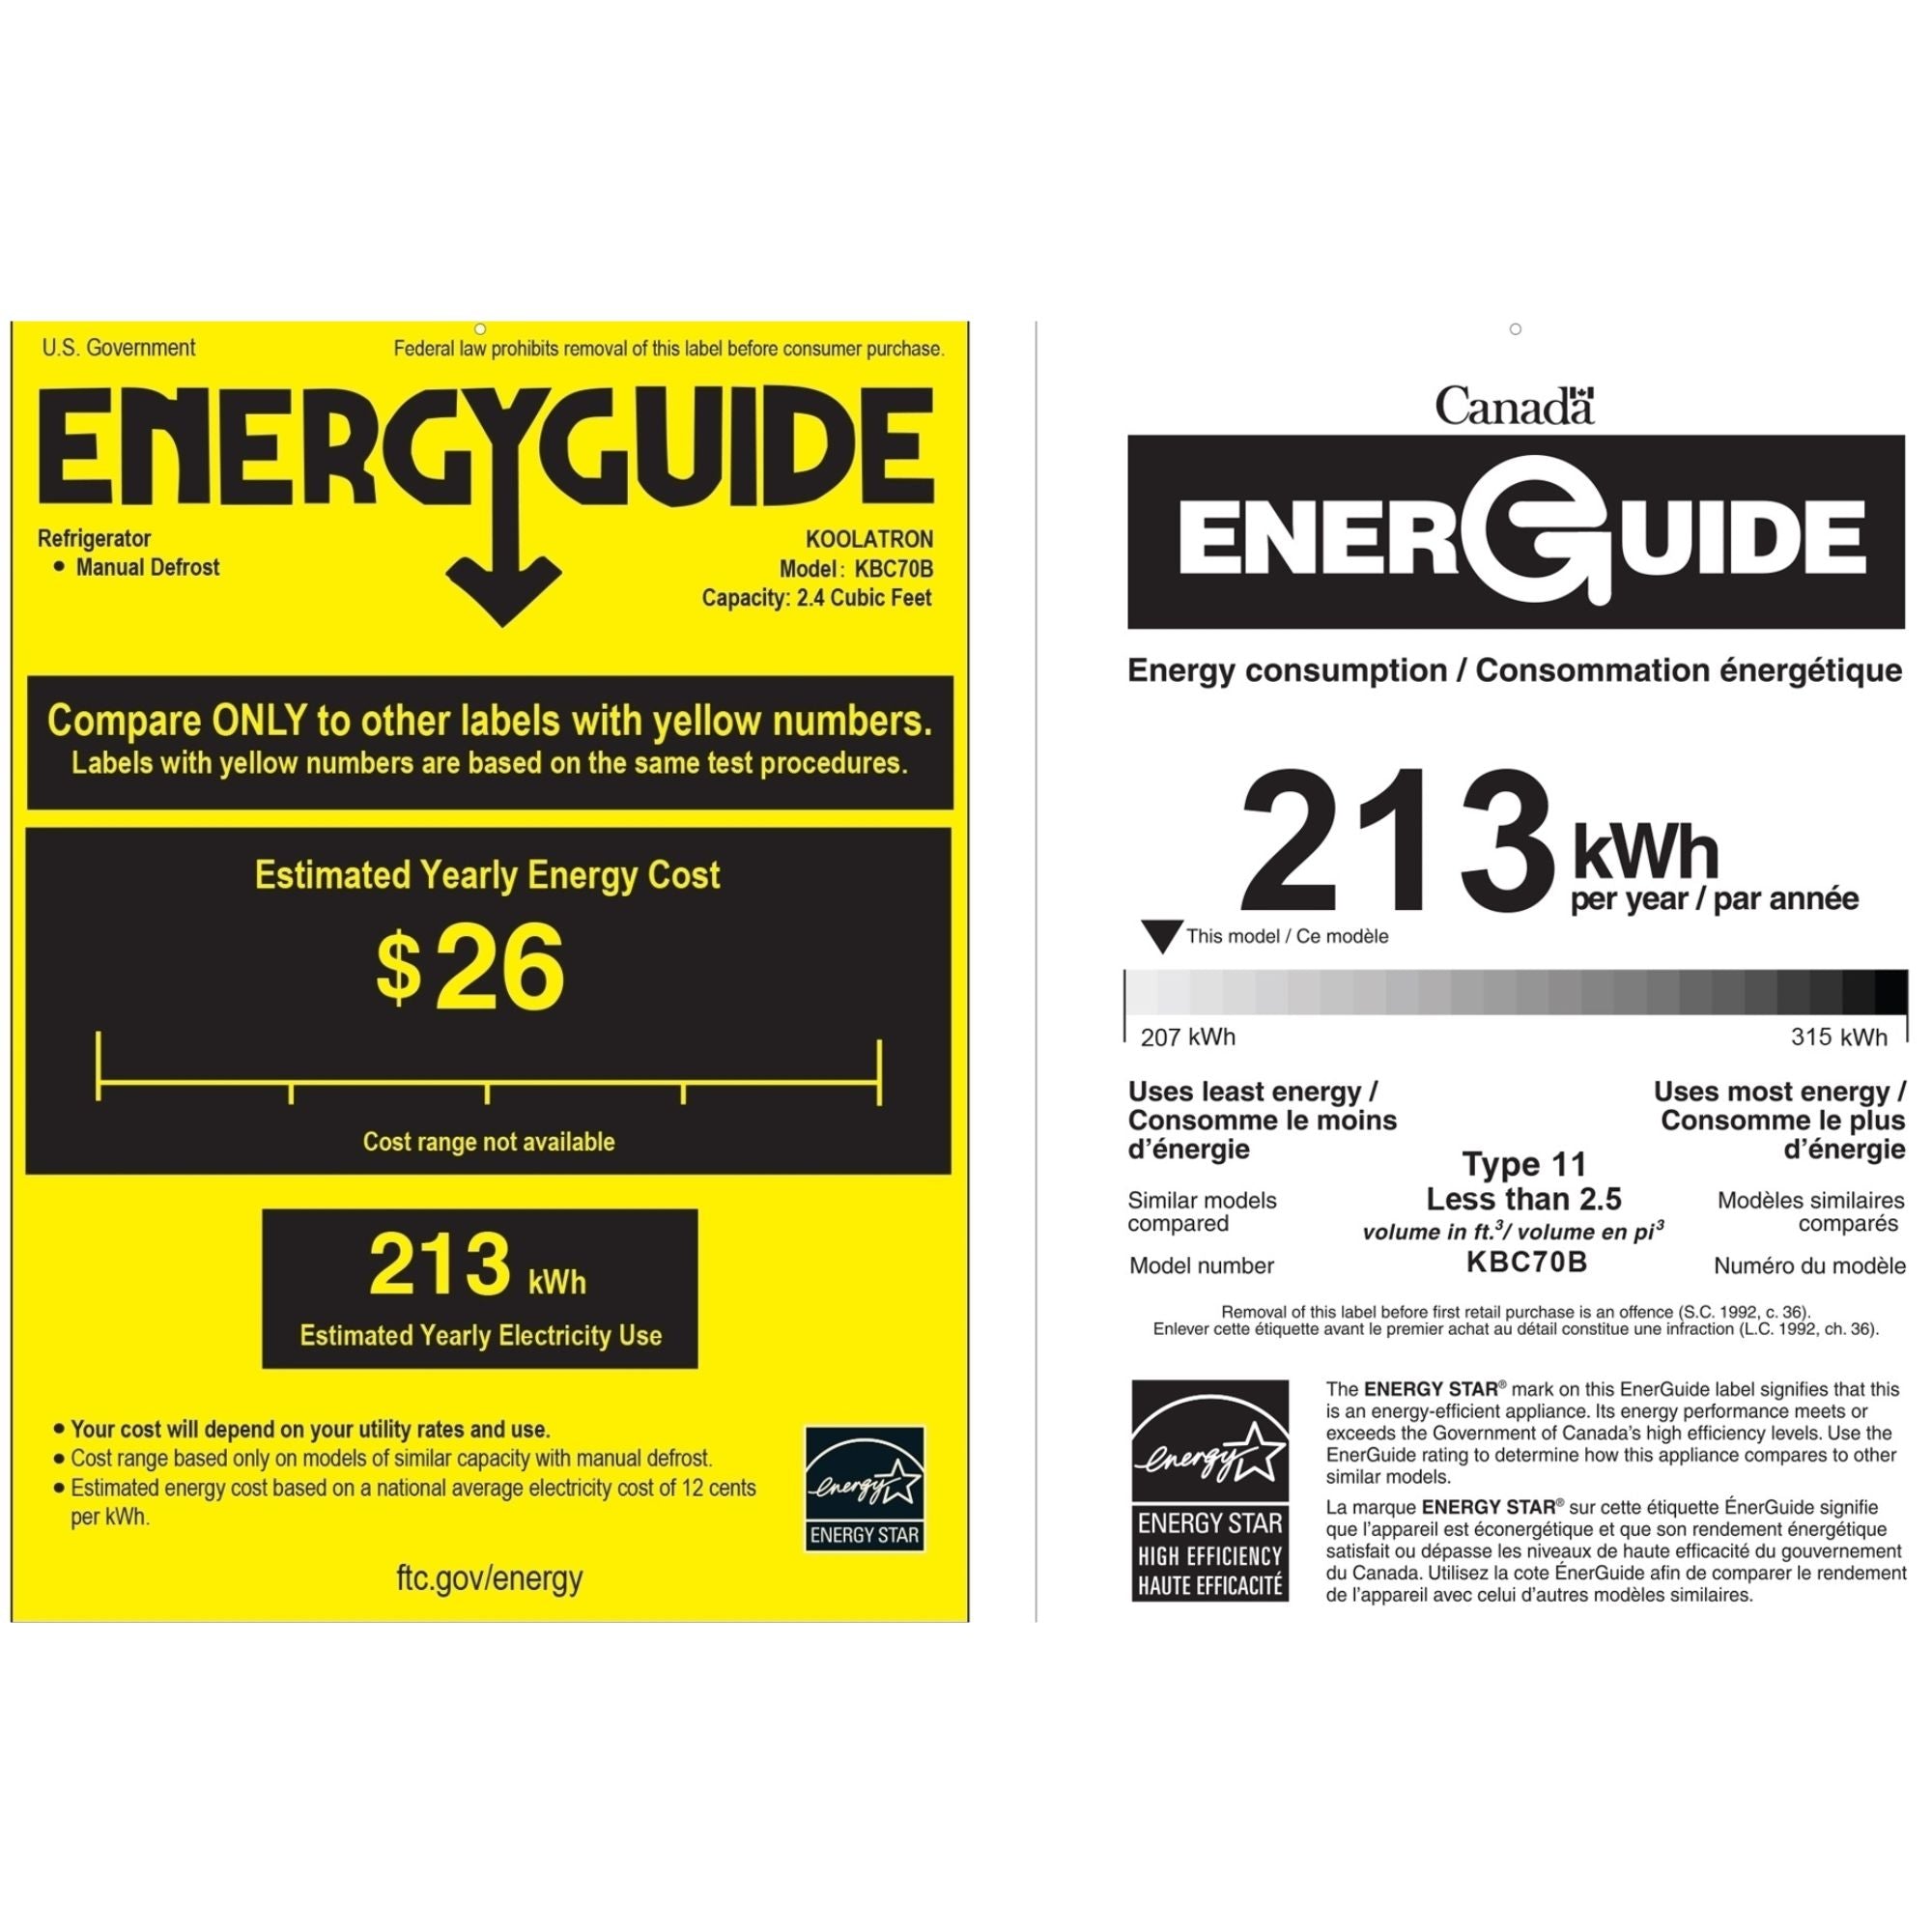 US and Canada Energy Guide certificates for KBC70 2.56 cu ft compact fridge with freezer showing estimated yearly energy cost of $26 and estimated yearly energy consumption of 213 kWh